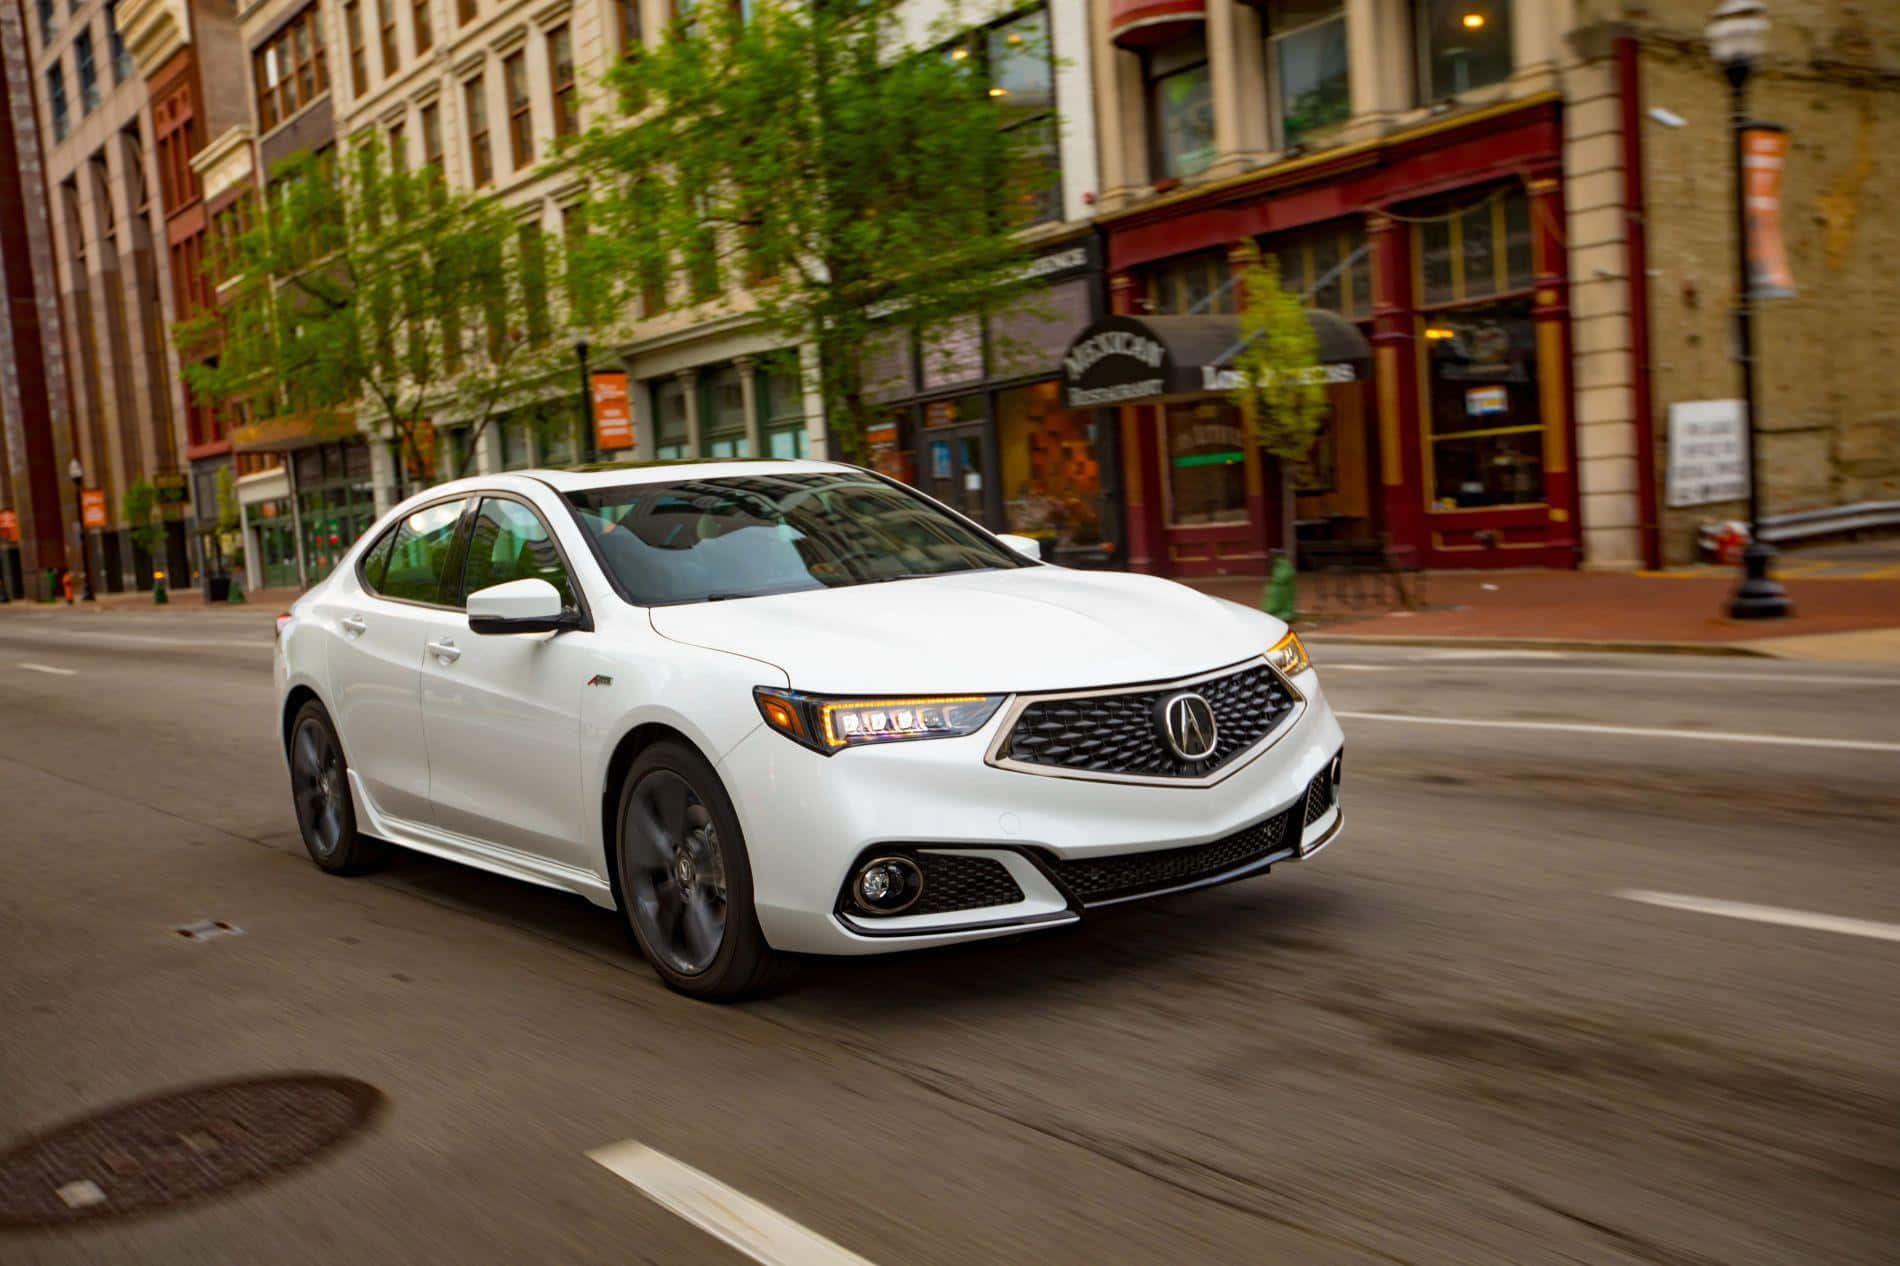 Caption: Sleek Acura TLX in its Natural Element Wallpaper